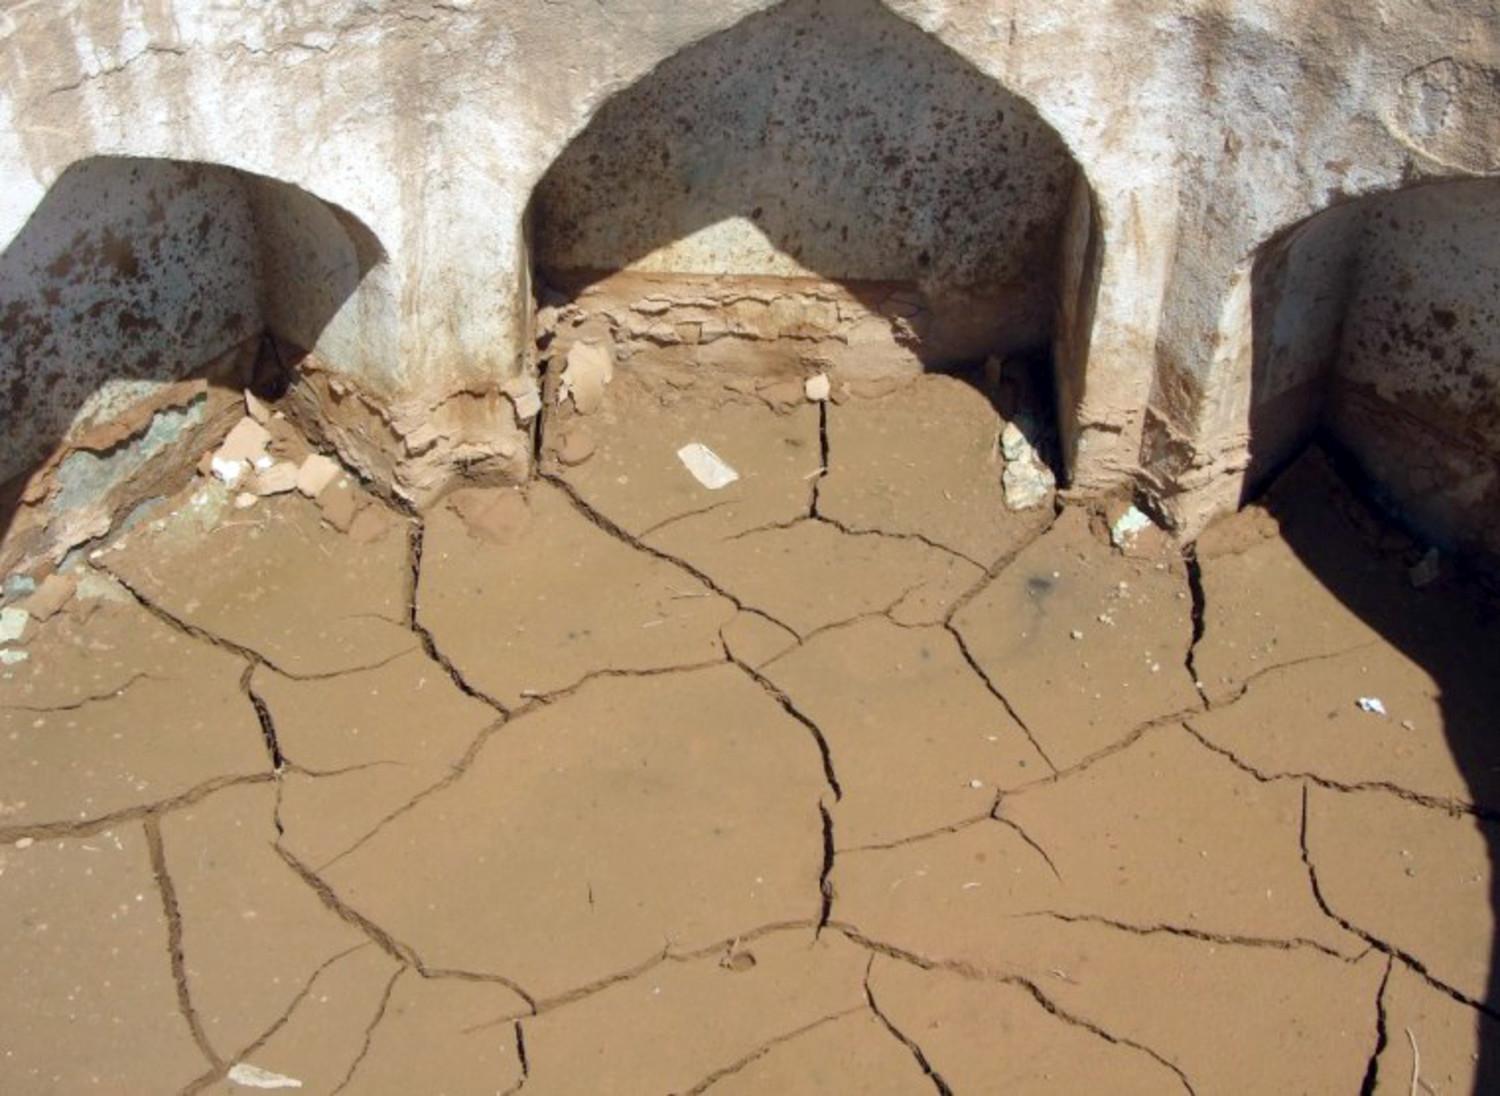 Receding water leaves behind flood mud, that could crack open the hammam in freezing Kholm winters